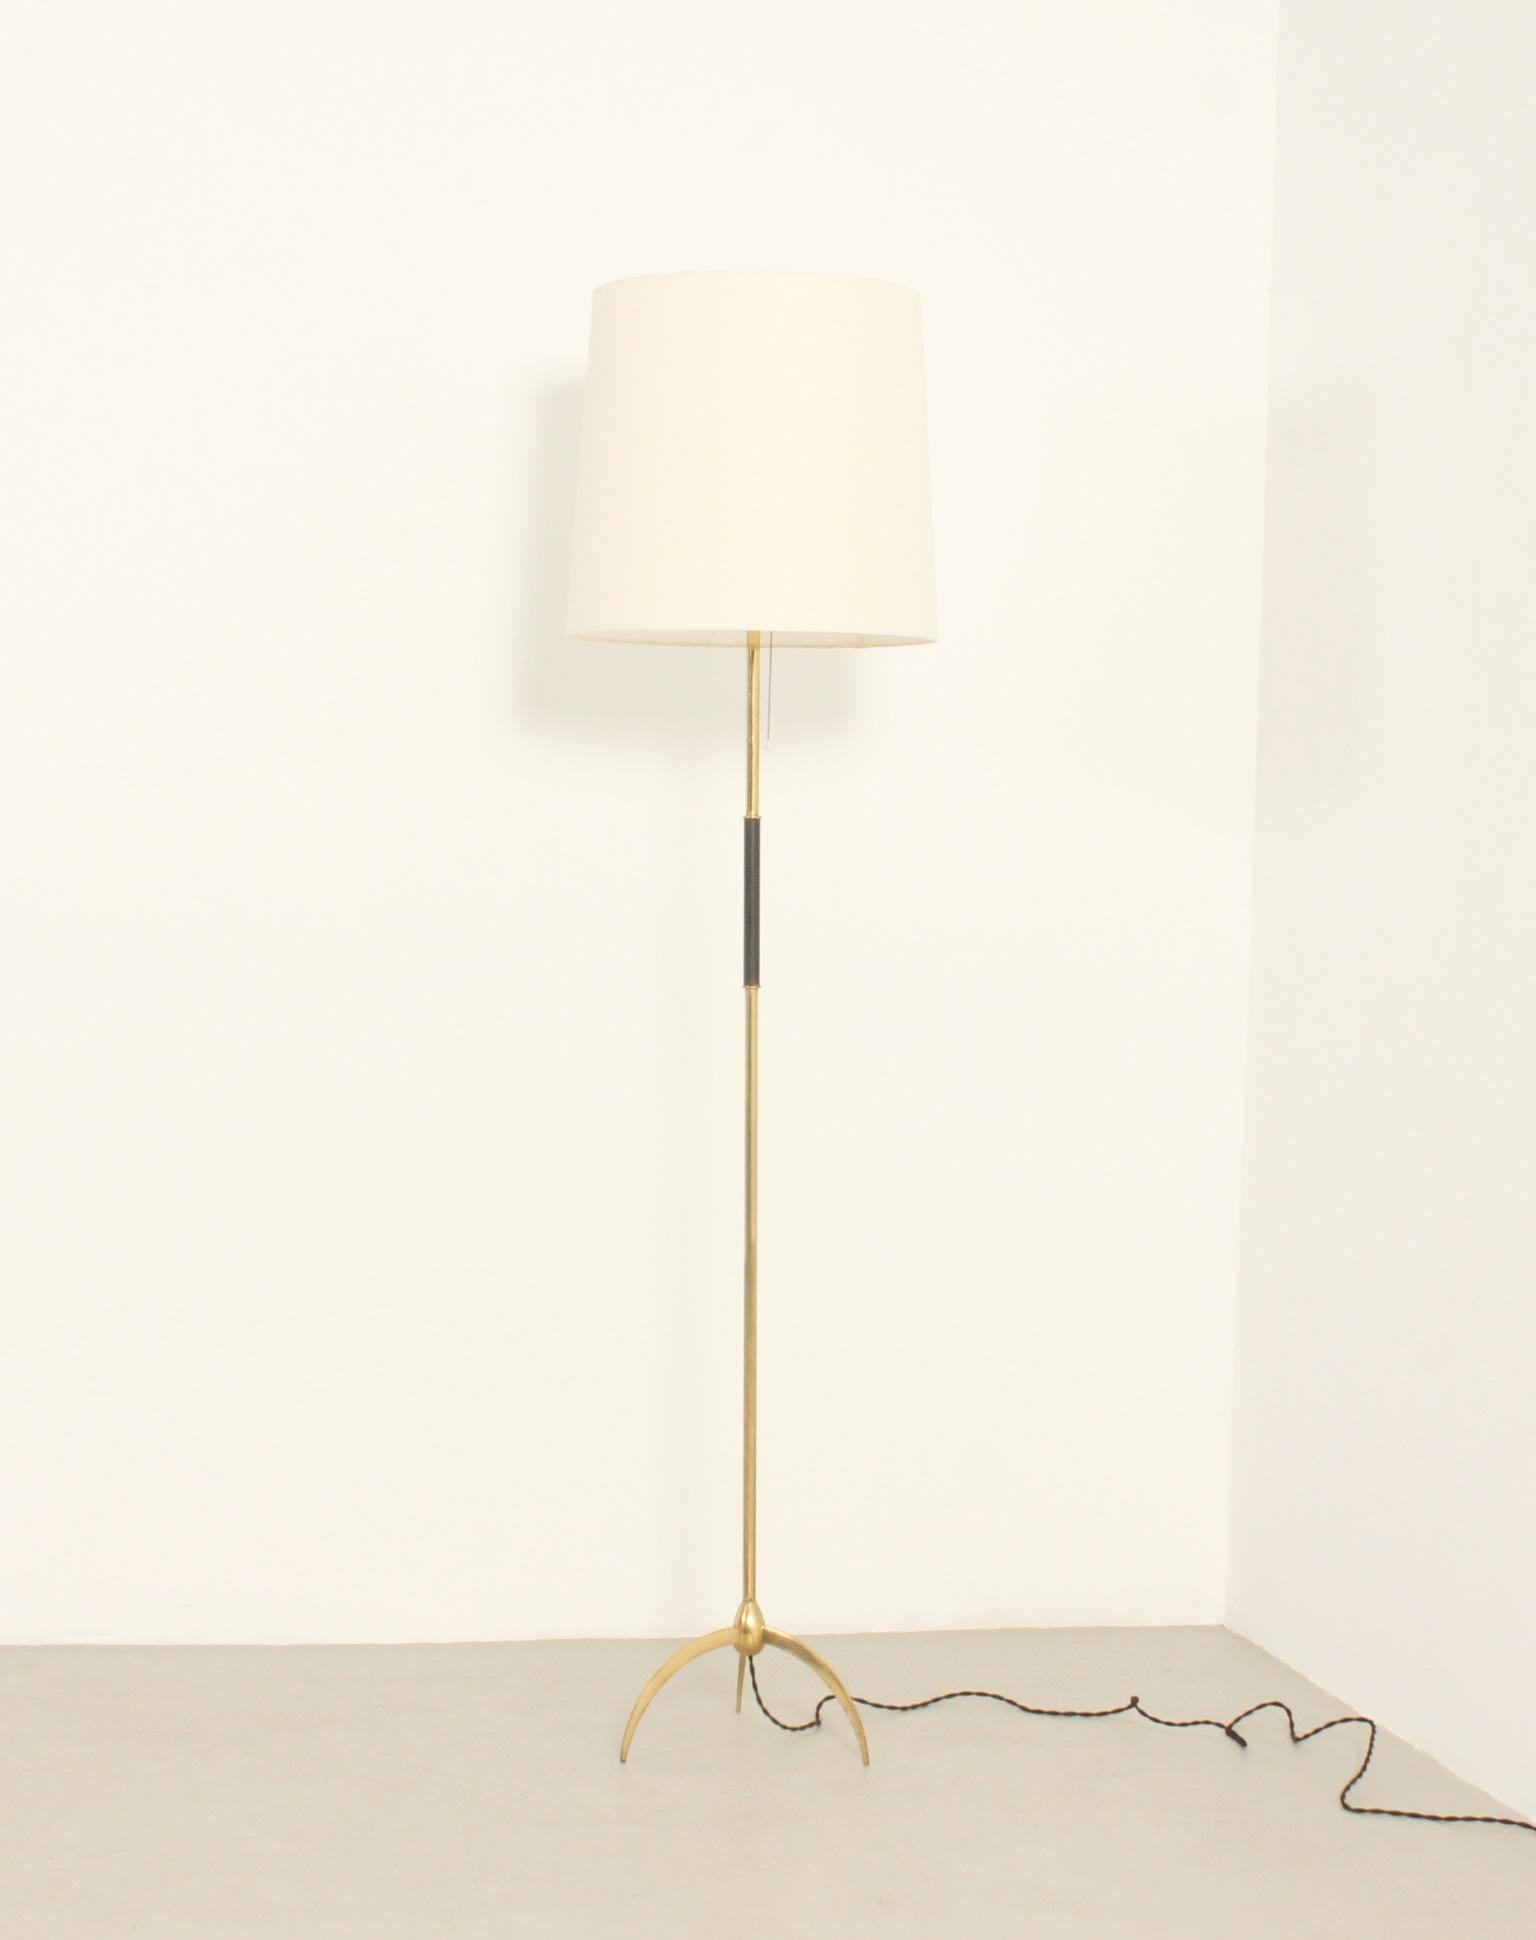 Spanish Brass Floor Lamp with Tripod Base, Spain, 1950's For Sale